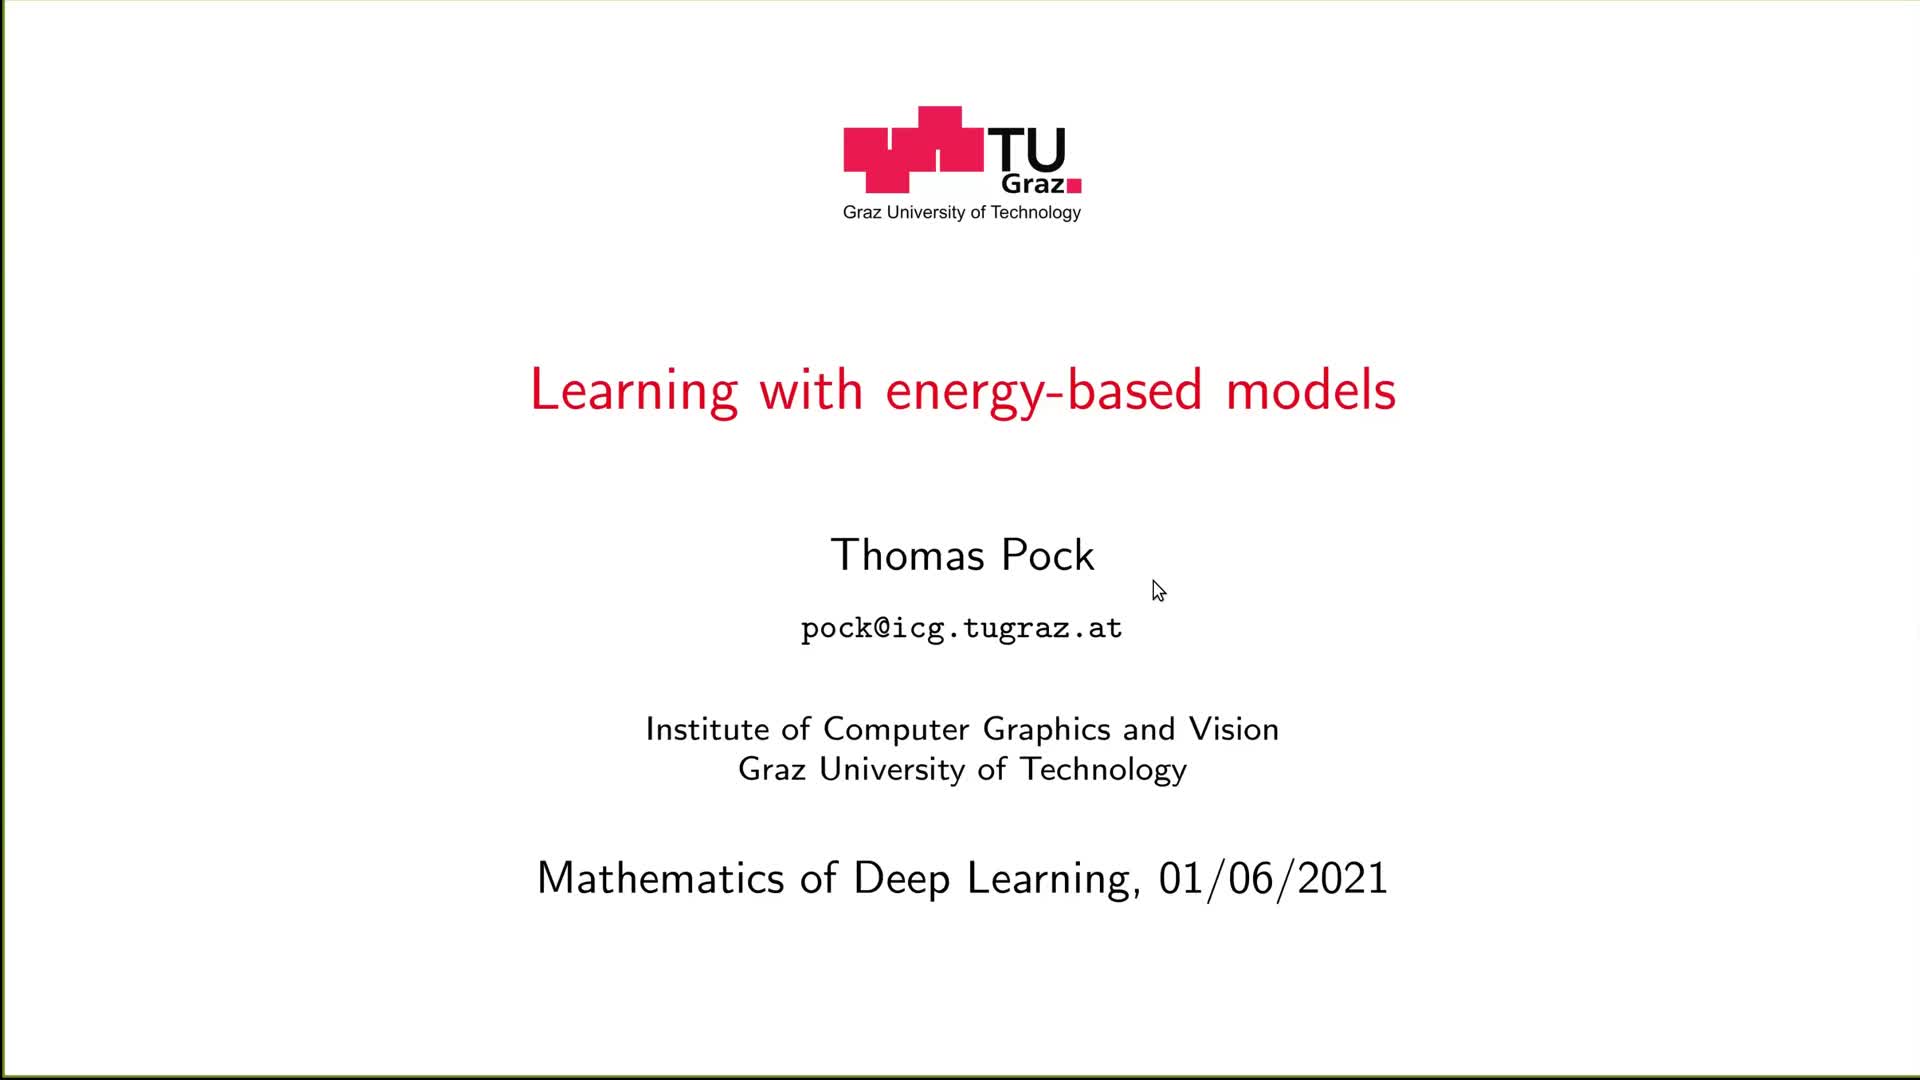 Learning with energy-based models preview image